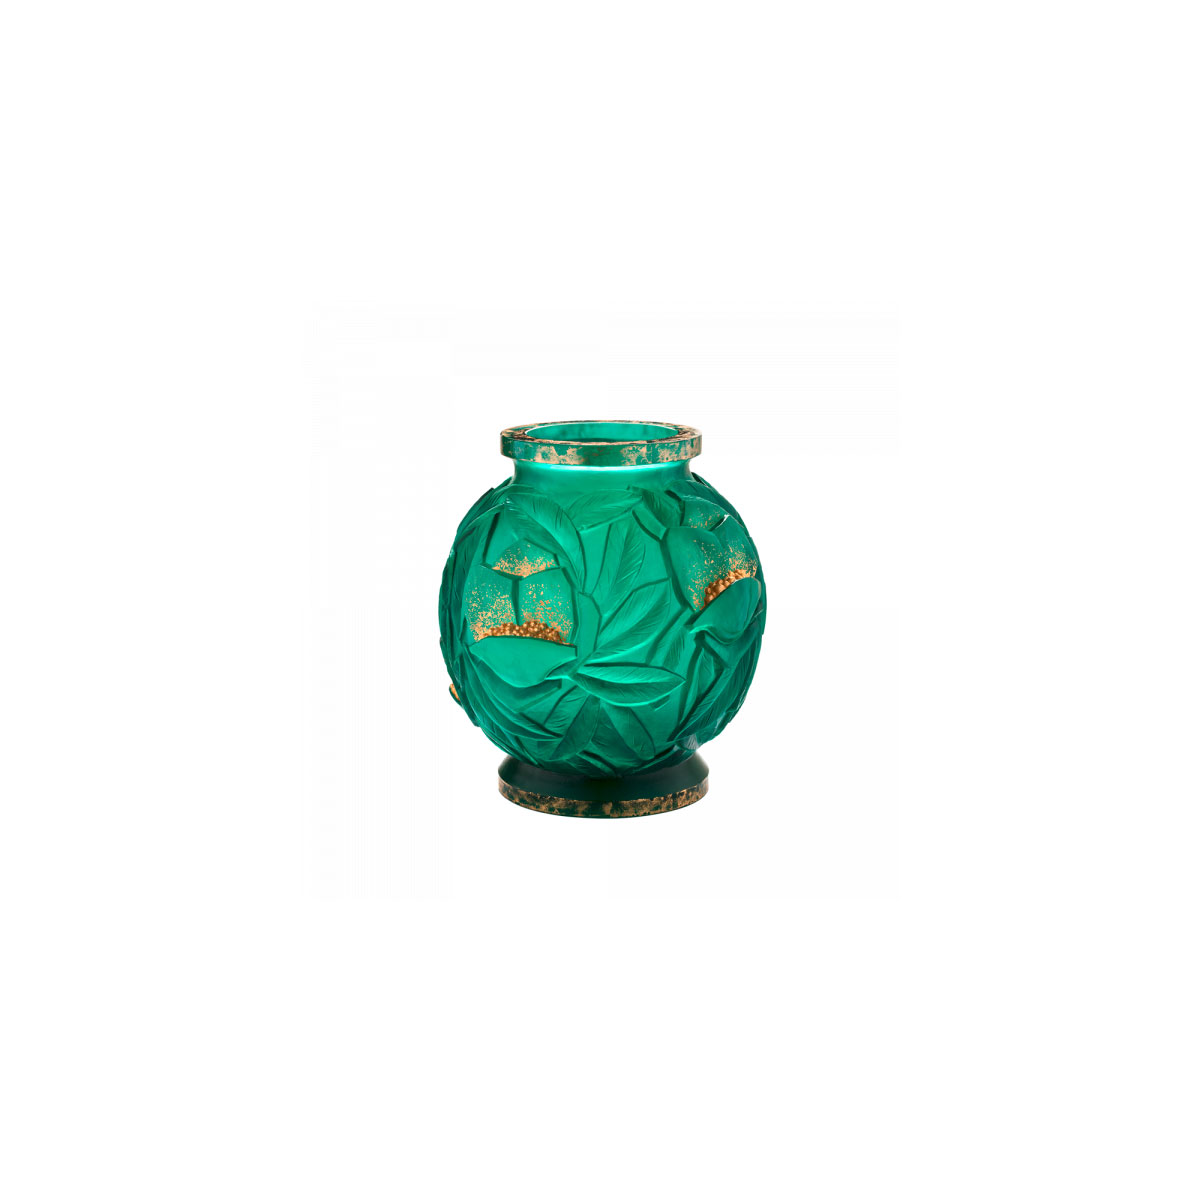 Daum Large Empreinte Vase in Green and Gold, Limited Edition